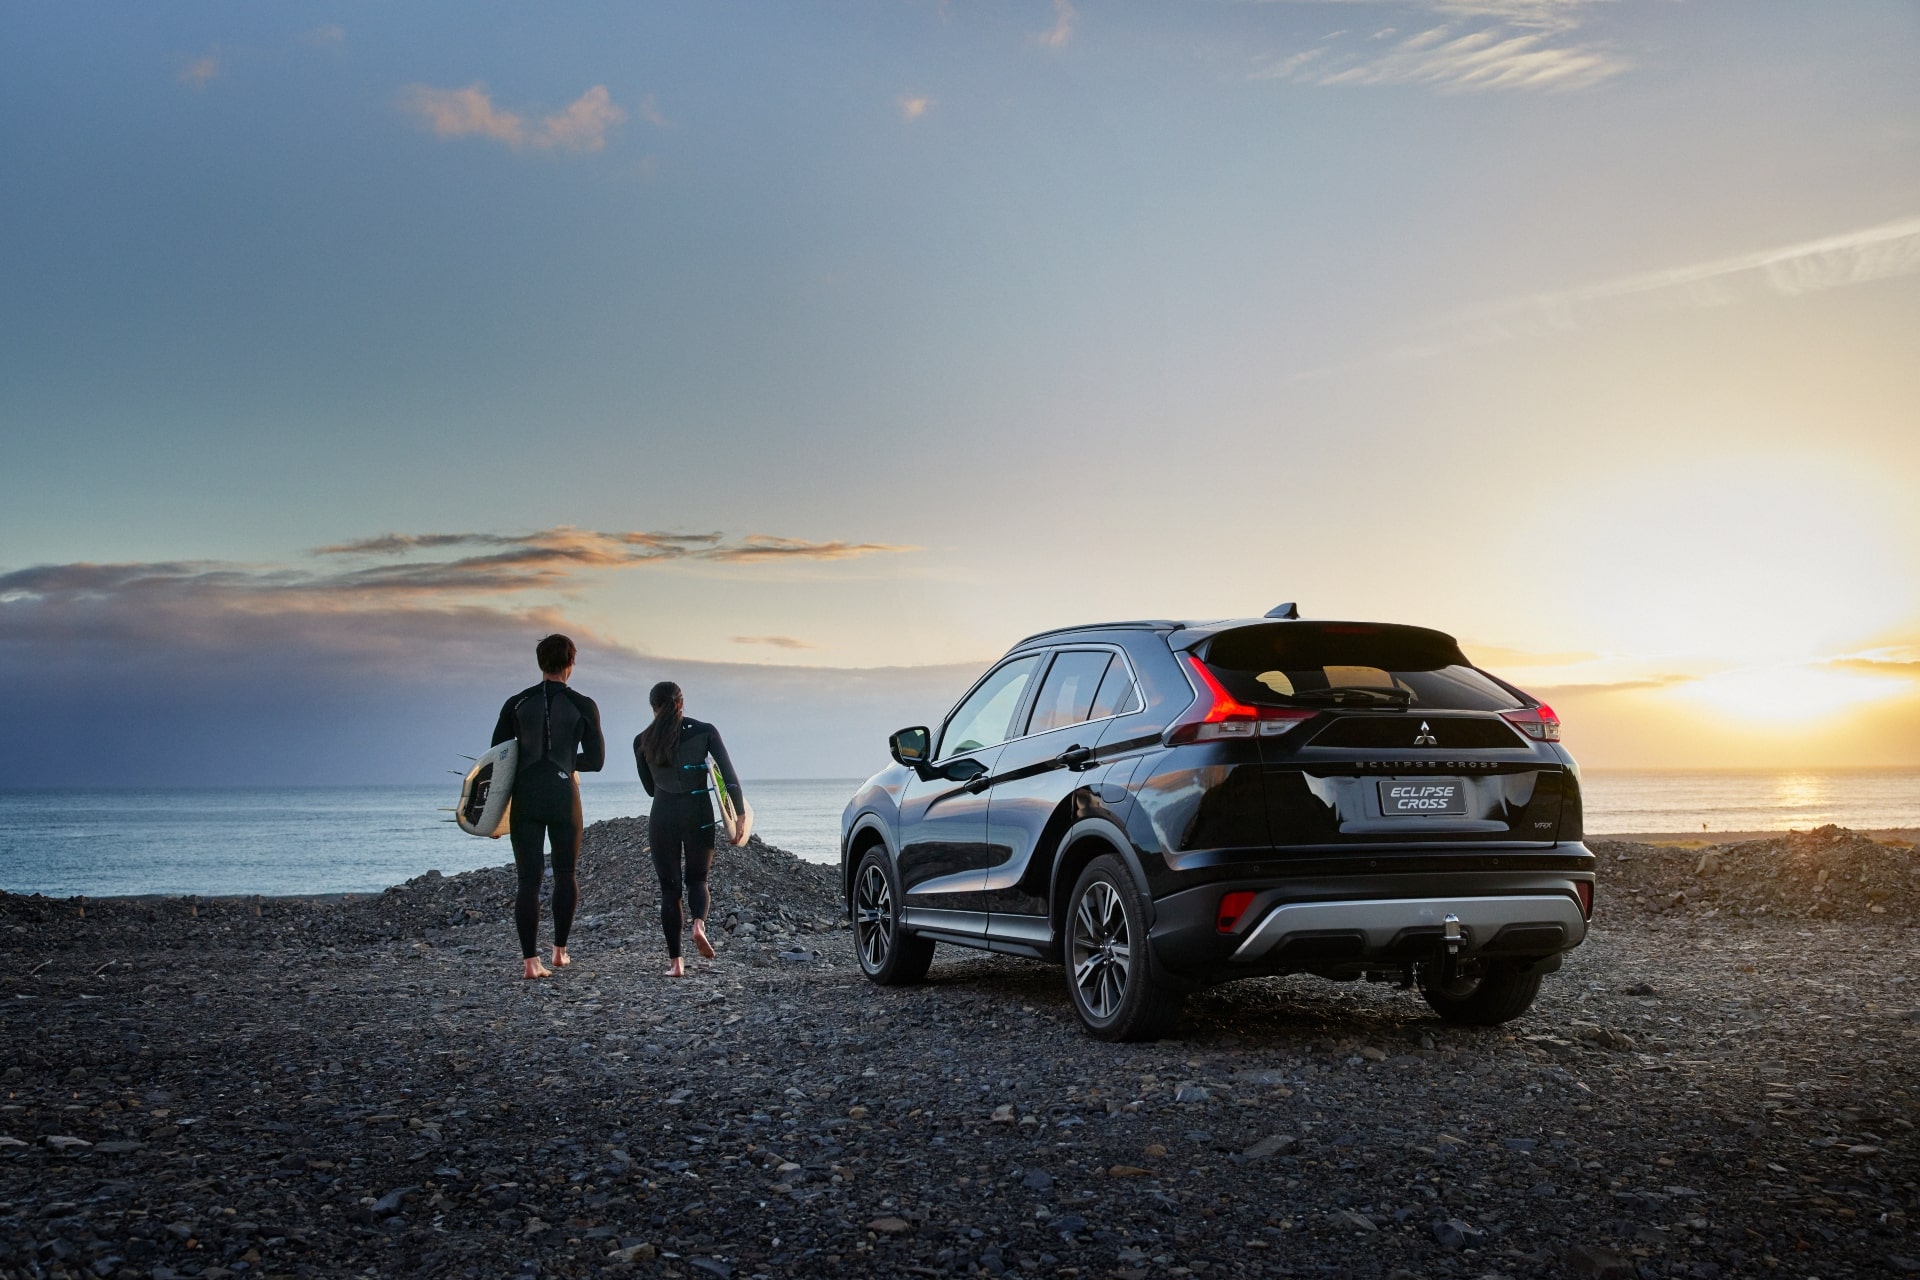 An image of Eclipse Cross and a couple at the beach